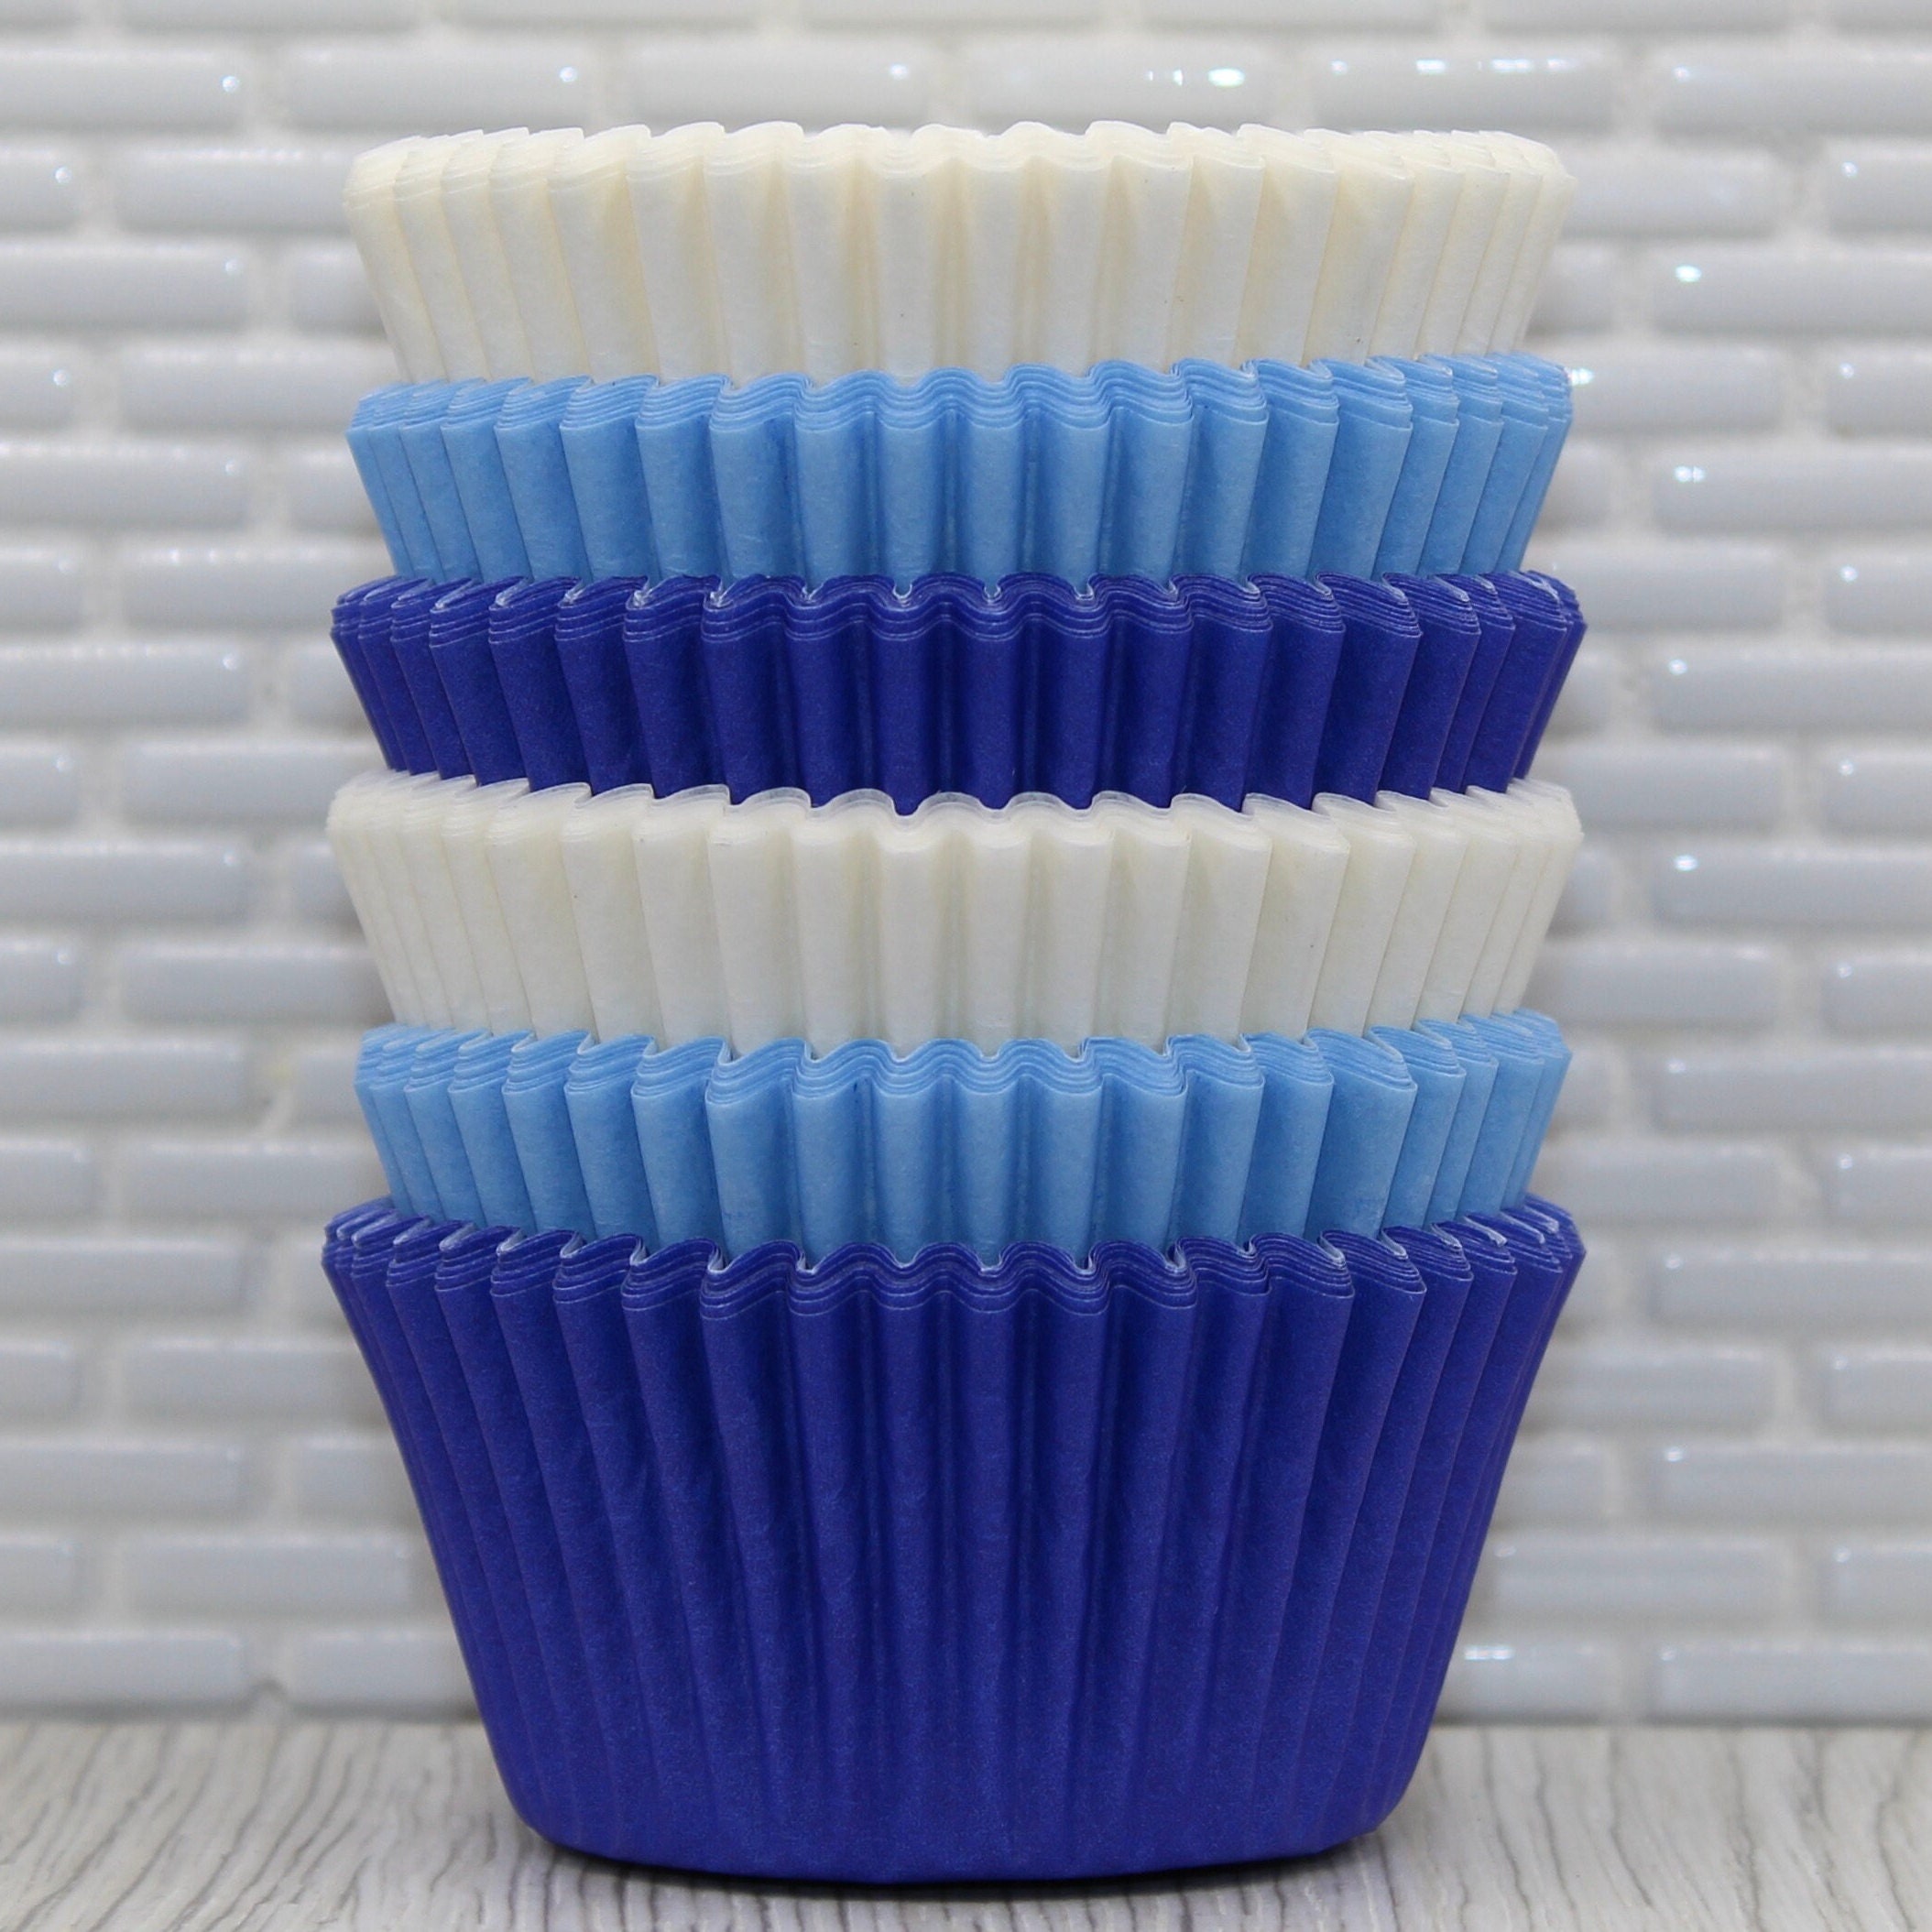 600 Pieces Cupcake Liners Paper Cupcake Wrappers Bulk Mini Baking Cup Cake  Cases Muffin Baking Paper Cups (assorted Colors,3 Inch)